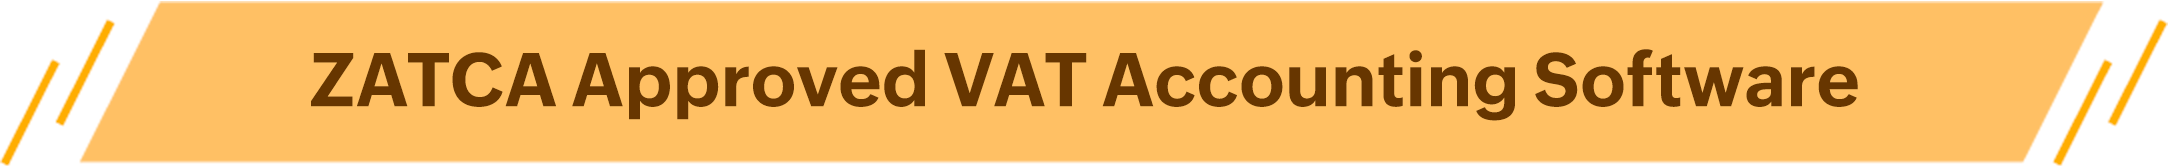 ZATCA Approved VAT Accounting Software